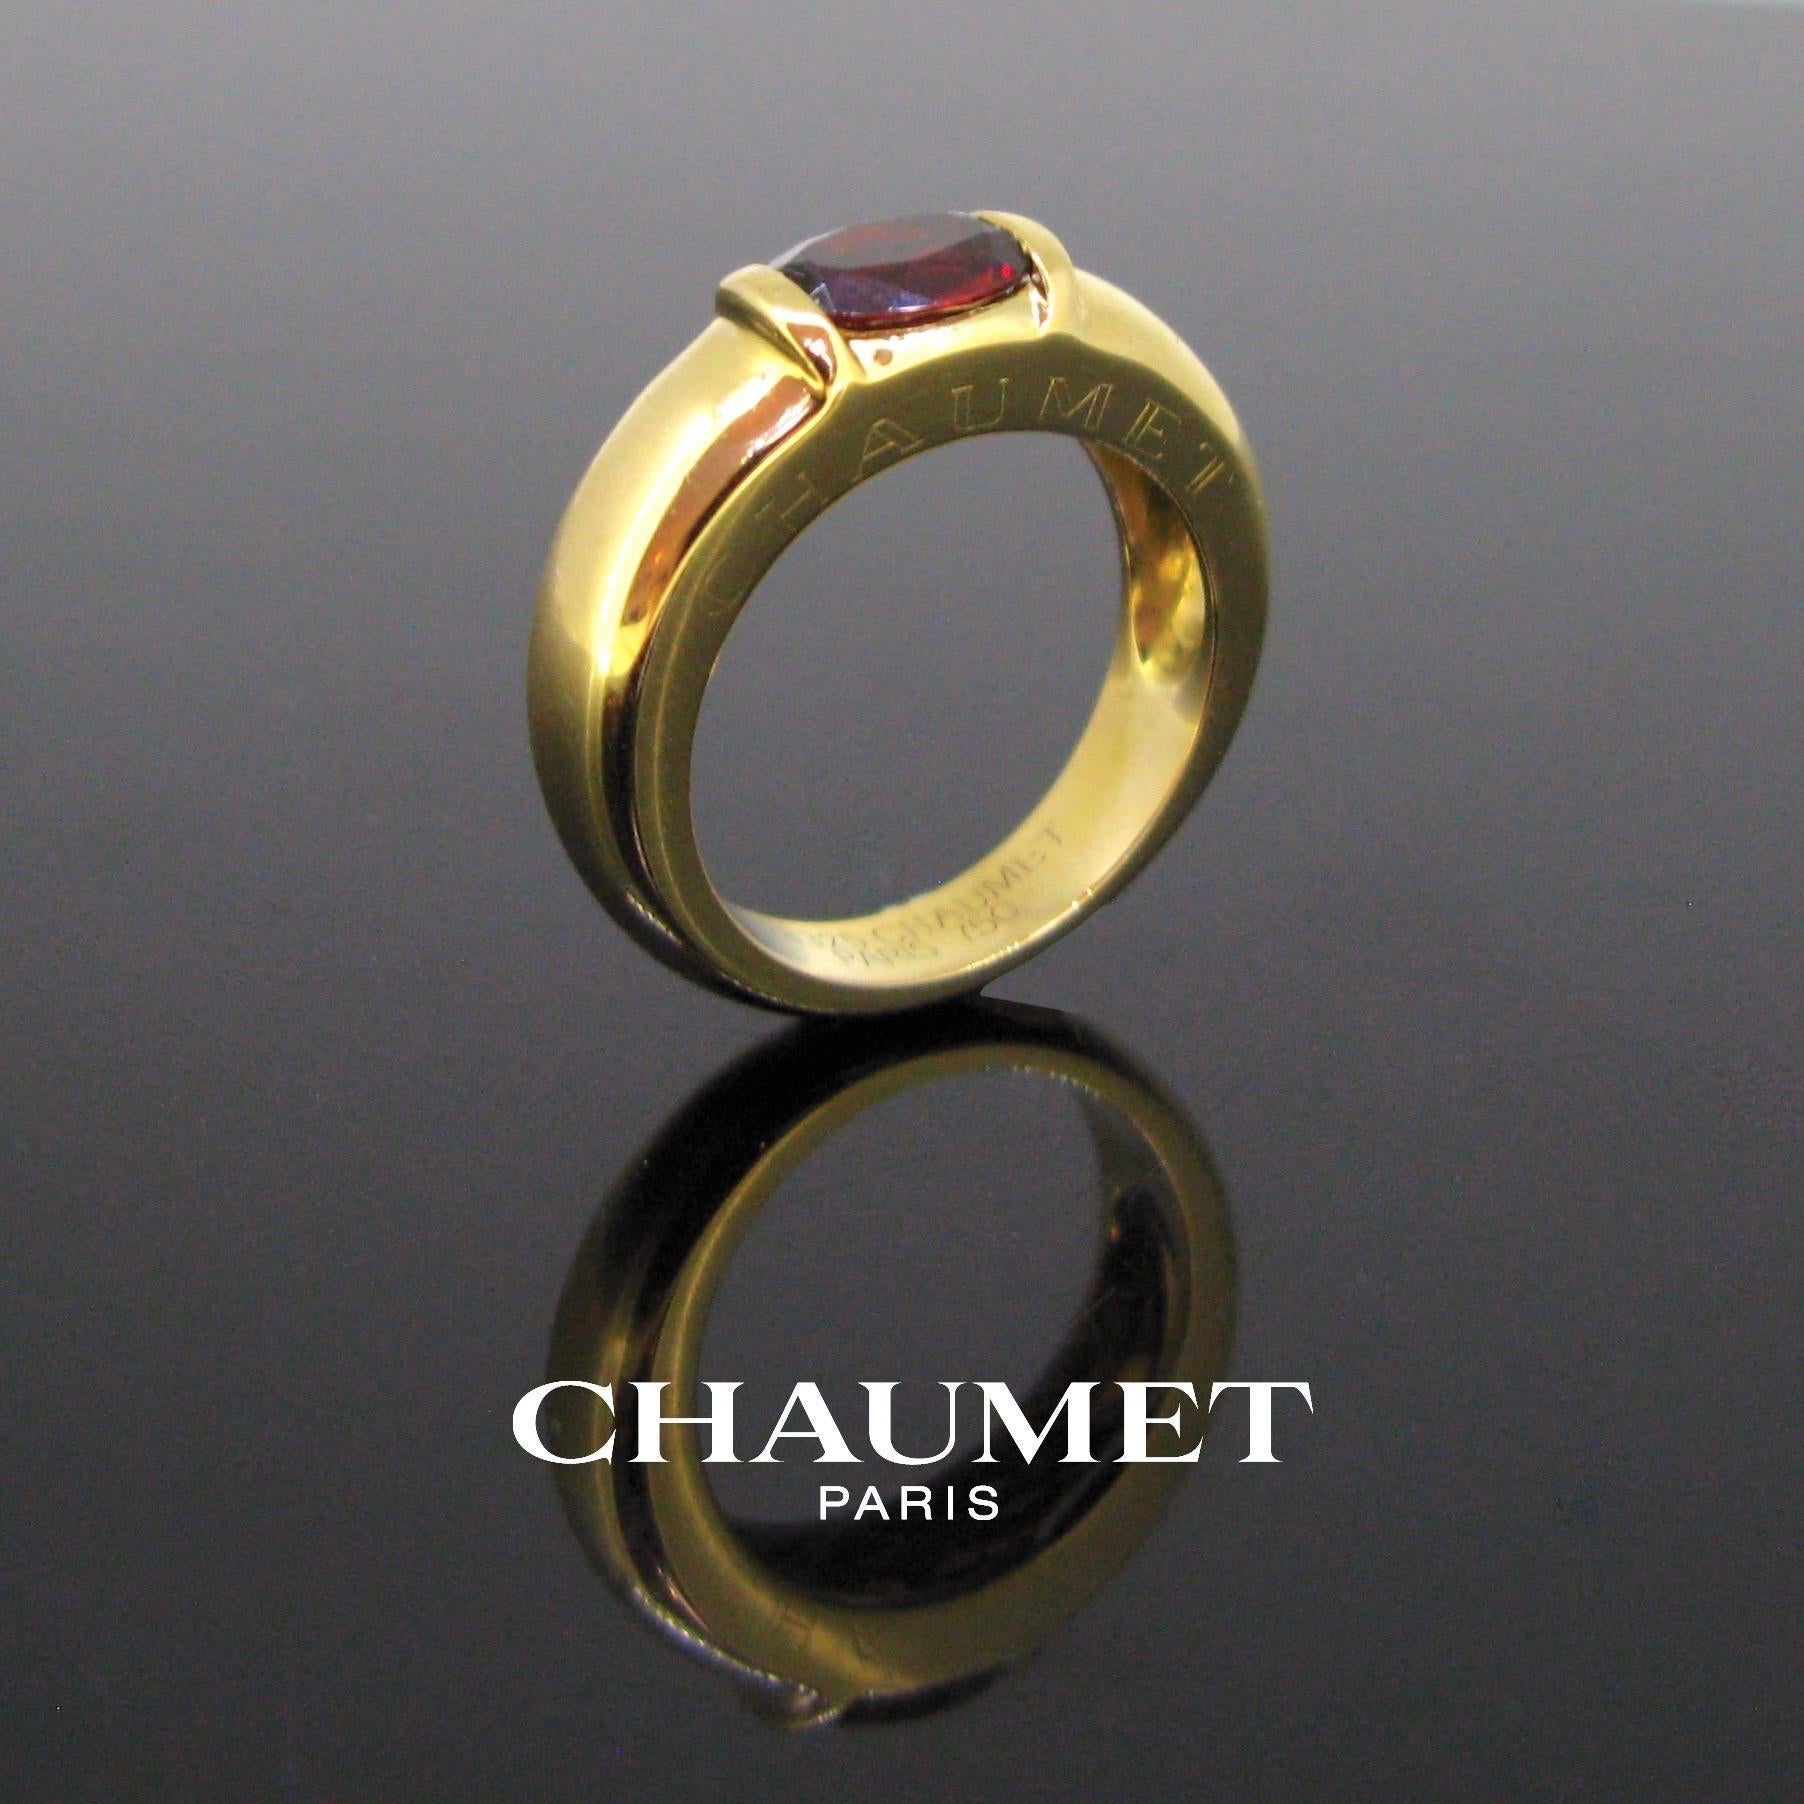 Weight:	 10.38gr
	

Metal:	18kt yellow Gold 


Stones:	1 Garnet
•	Cut:	Oval
•	Carat weight:	3ct approximately


Condition:	Very Good 


Signature:	Chaumet Paris, nº328325


Hallmarks:	French – eagle’s head
	 

Comments:	This ring is made in 18kt